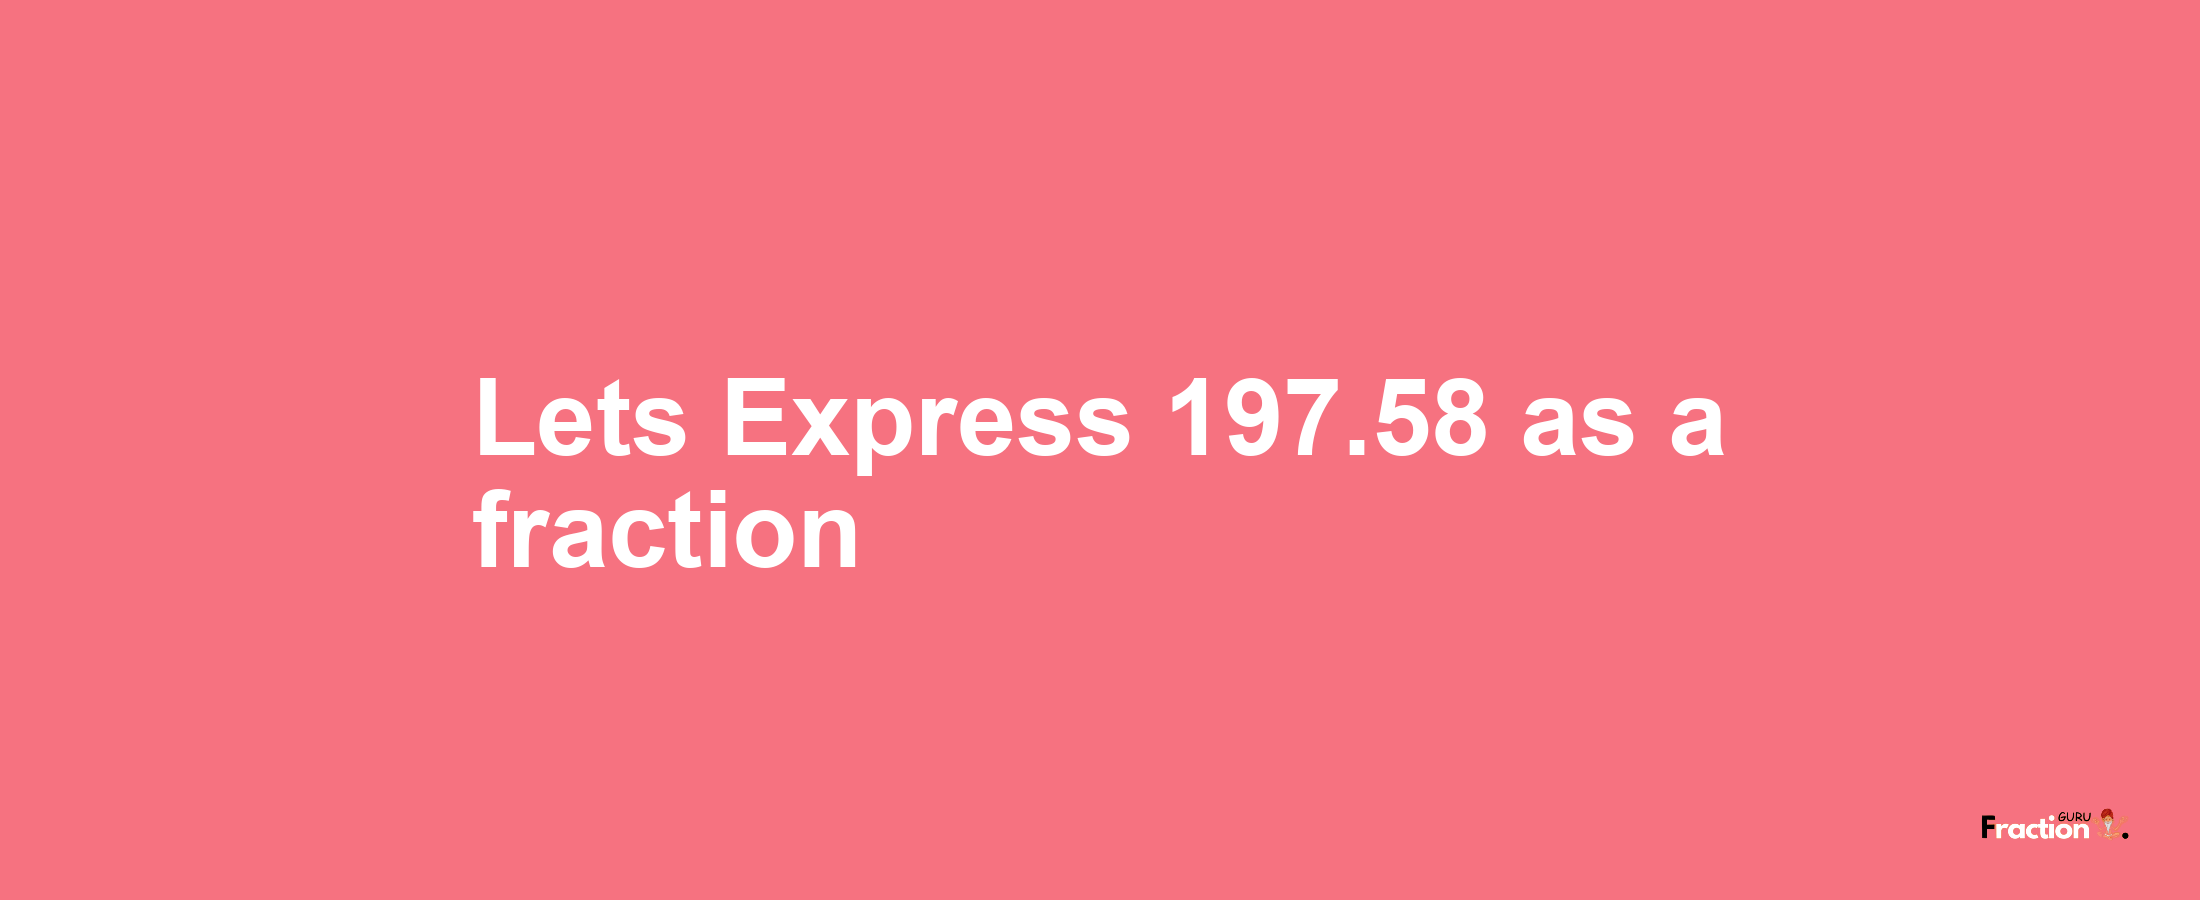 Lets Express 197.58 as afraction